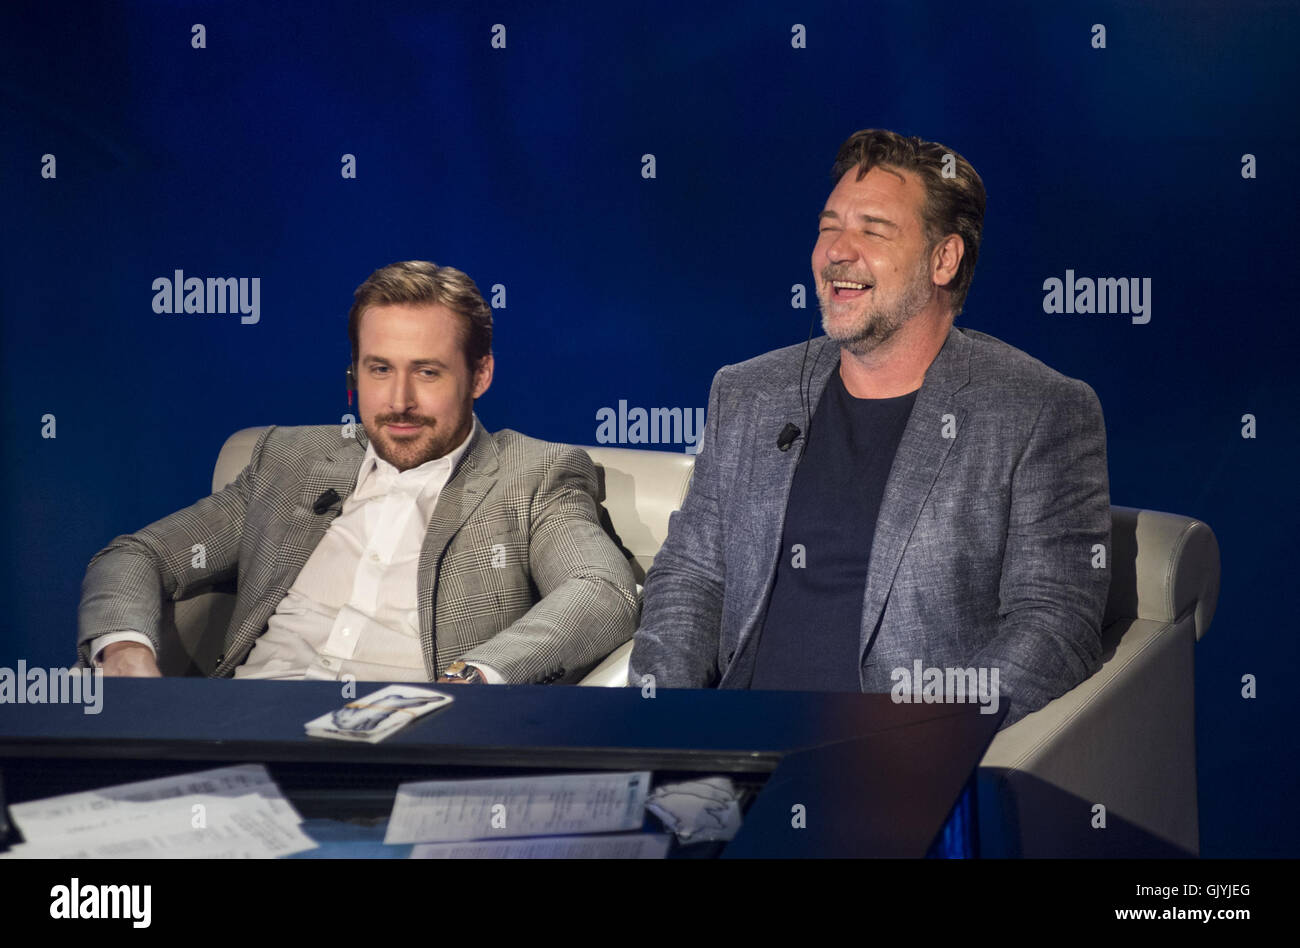 Ryan Gosling and Russell Crowe appear on Italian TV show 'Che tempo che fa'  Featuring: Ryan Gosling, Russell Crowe Where: Milan, Italy When: 22 May  2016 Credit: IPA/WENN.com **Only available for publication